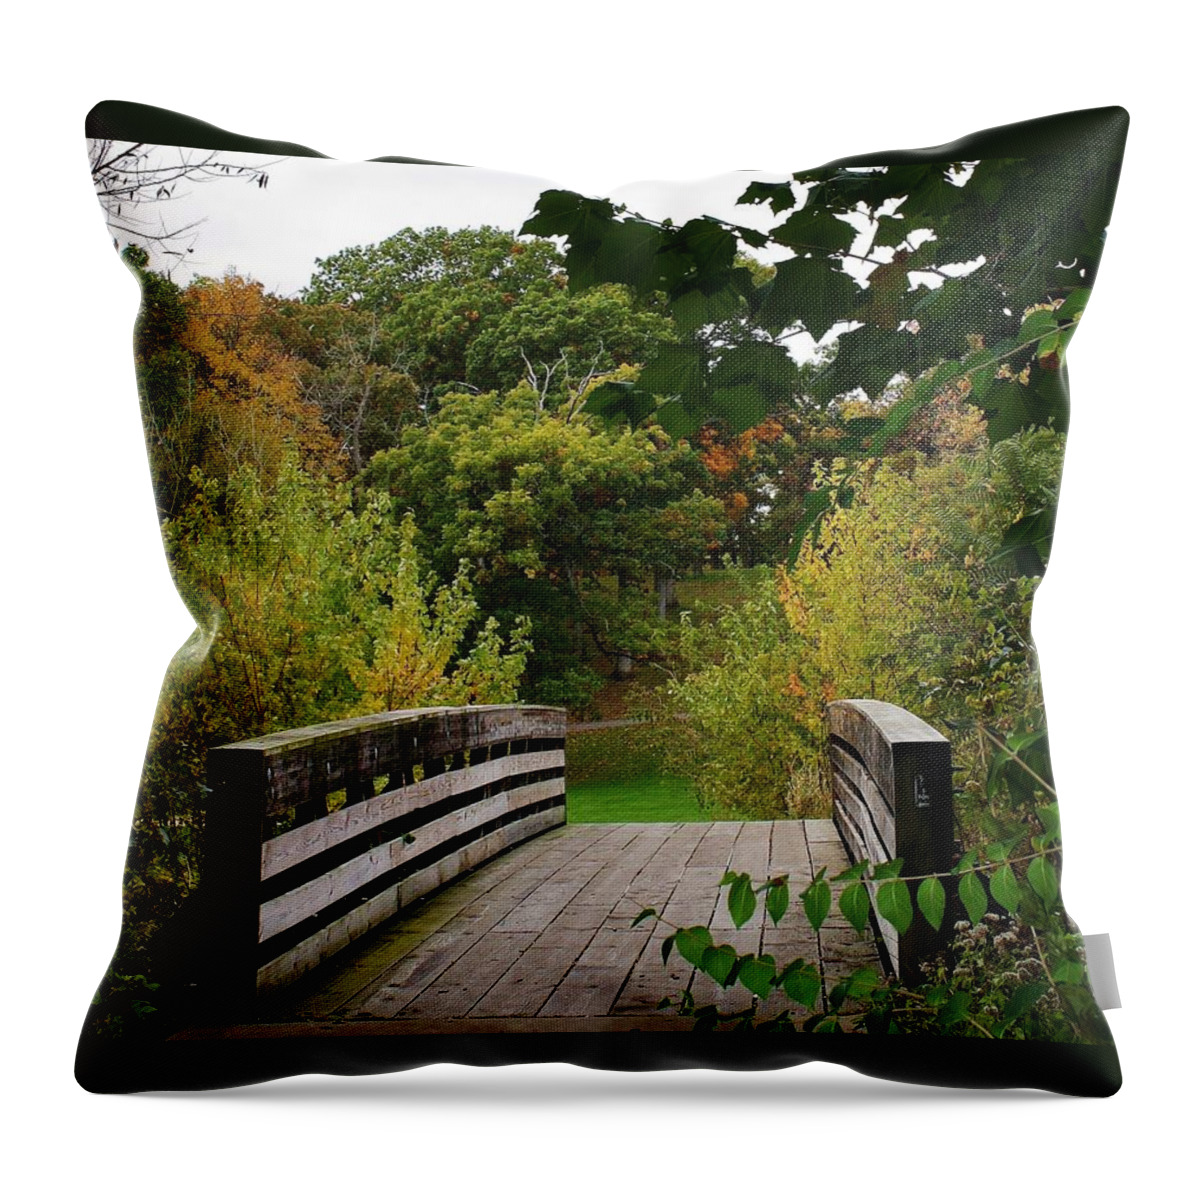 Woodland Throw Pillow featuring the photograph Walking Bridge by Bruce Bley